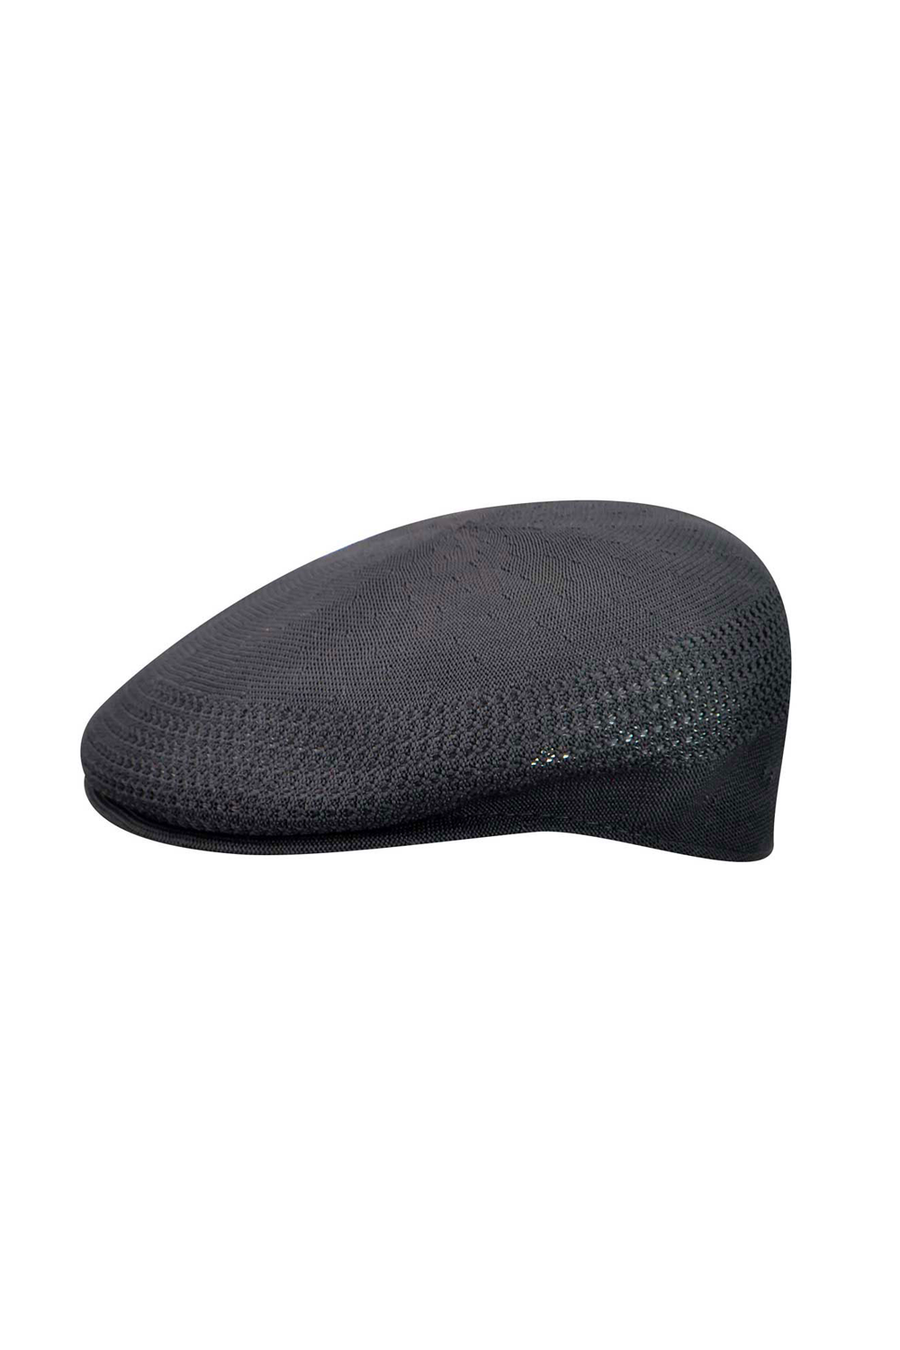 Buy the Kangol Tropic 504 Ventair Hat in Black/Gold at Intro. Spend £50 for free UK delivery. Official stockists. We ship worldwide.